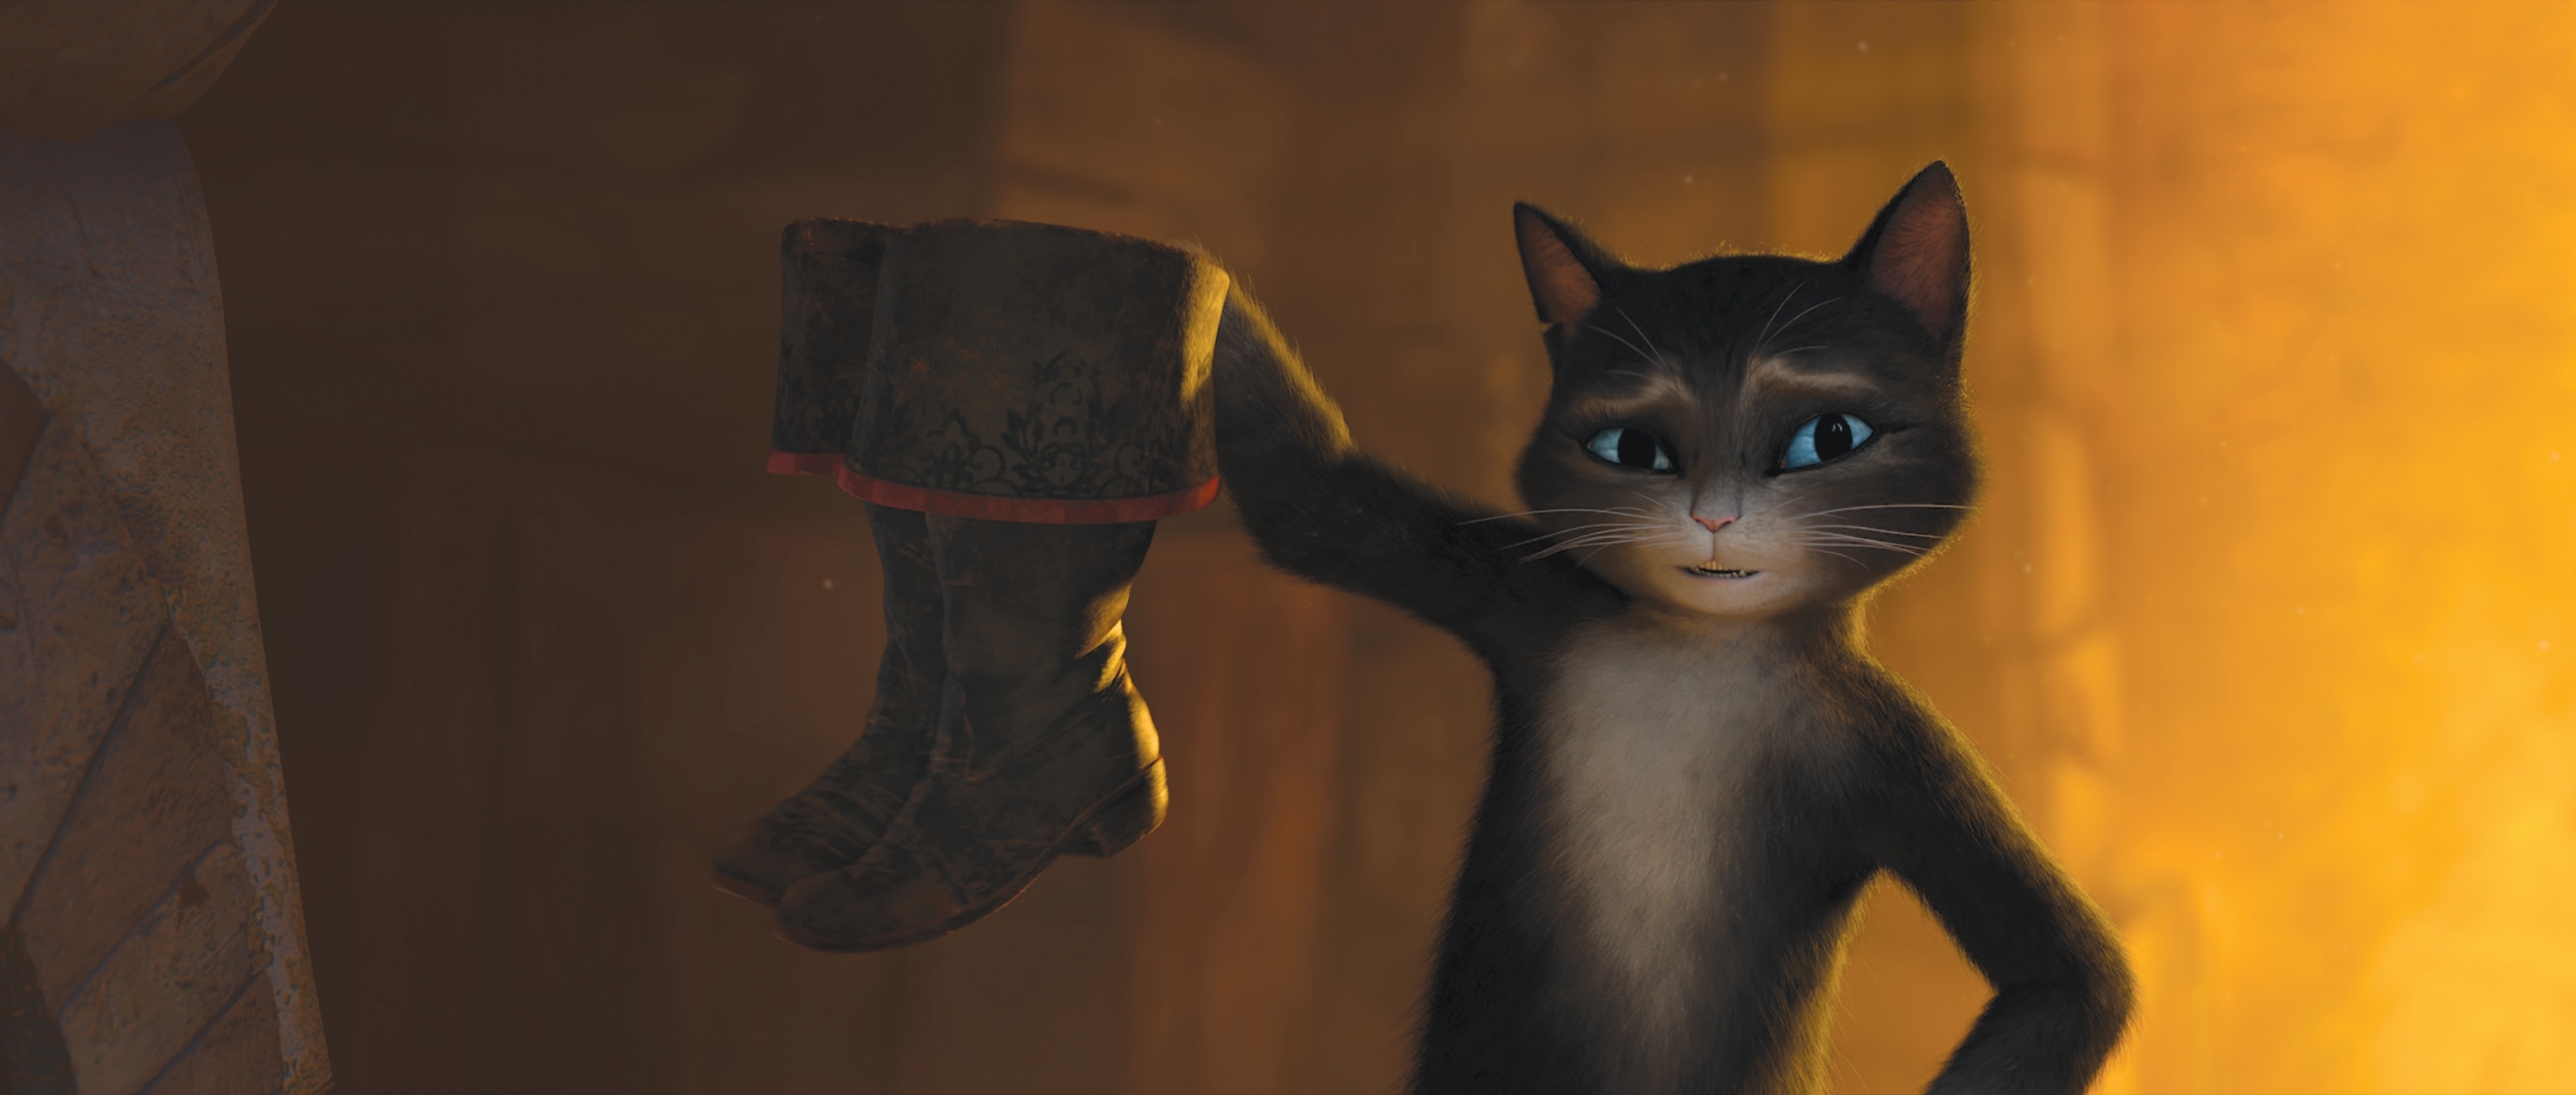 puss in boots, movie